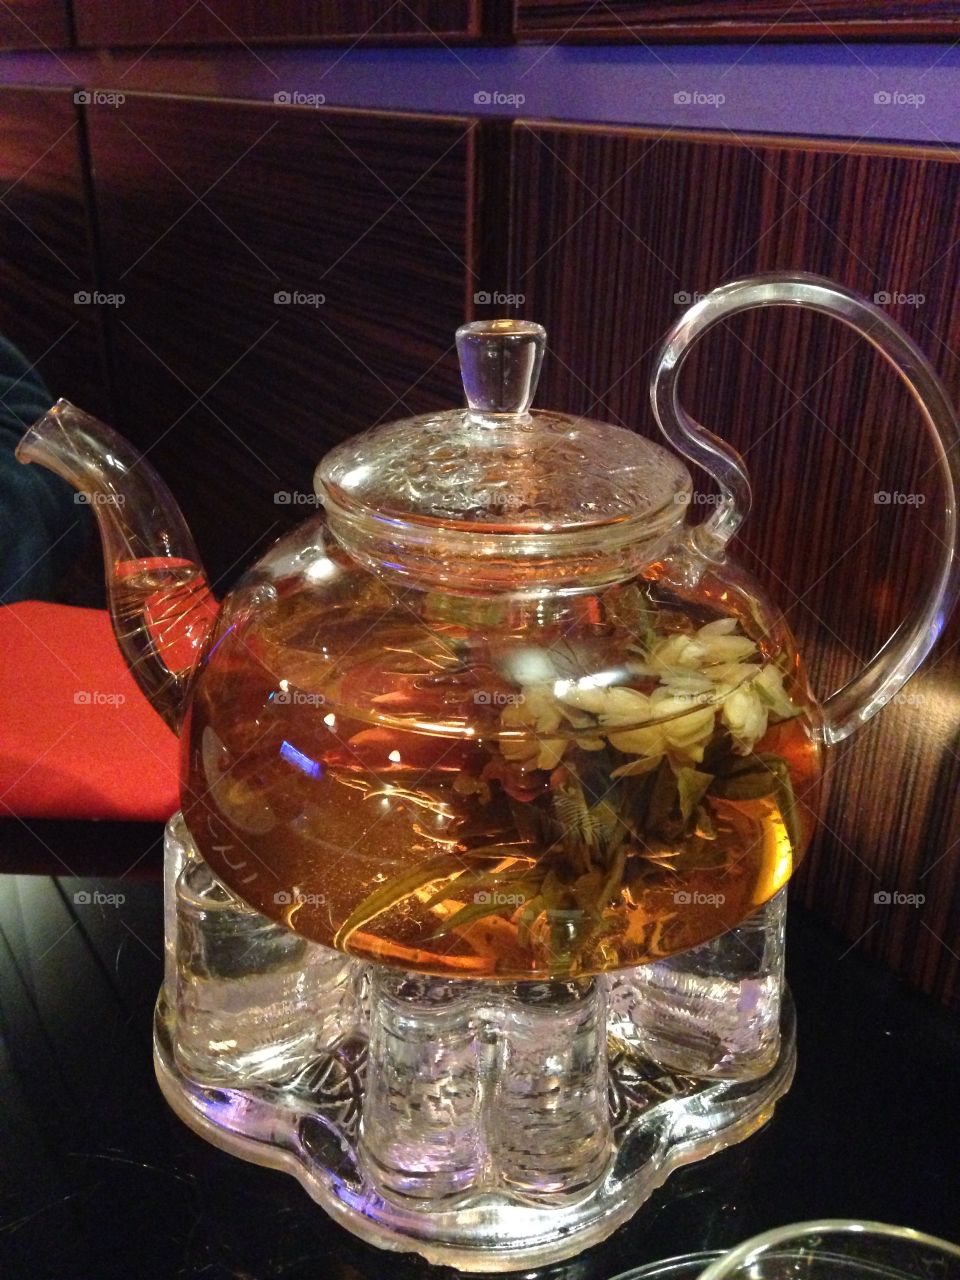 Jasmine tea brewing made with a real flower in a glass teapot in a Chinese restaurant